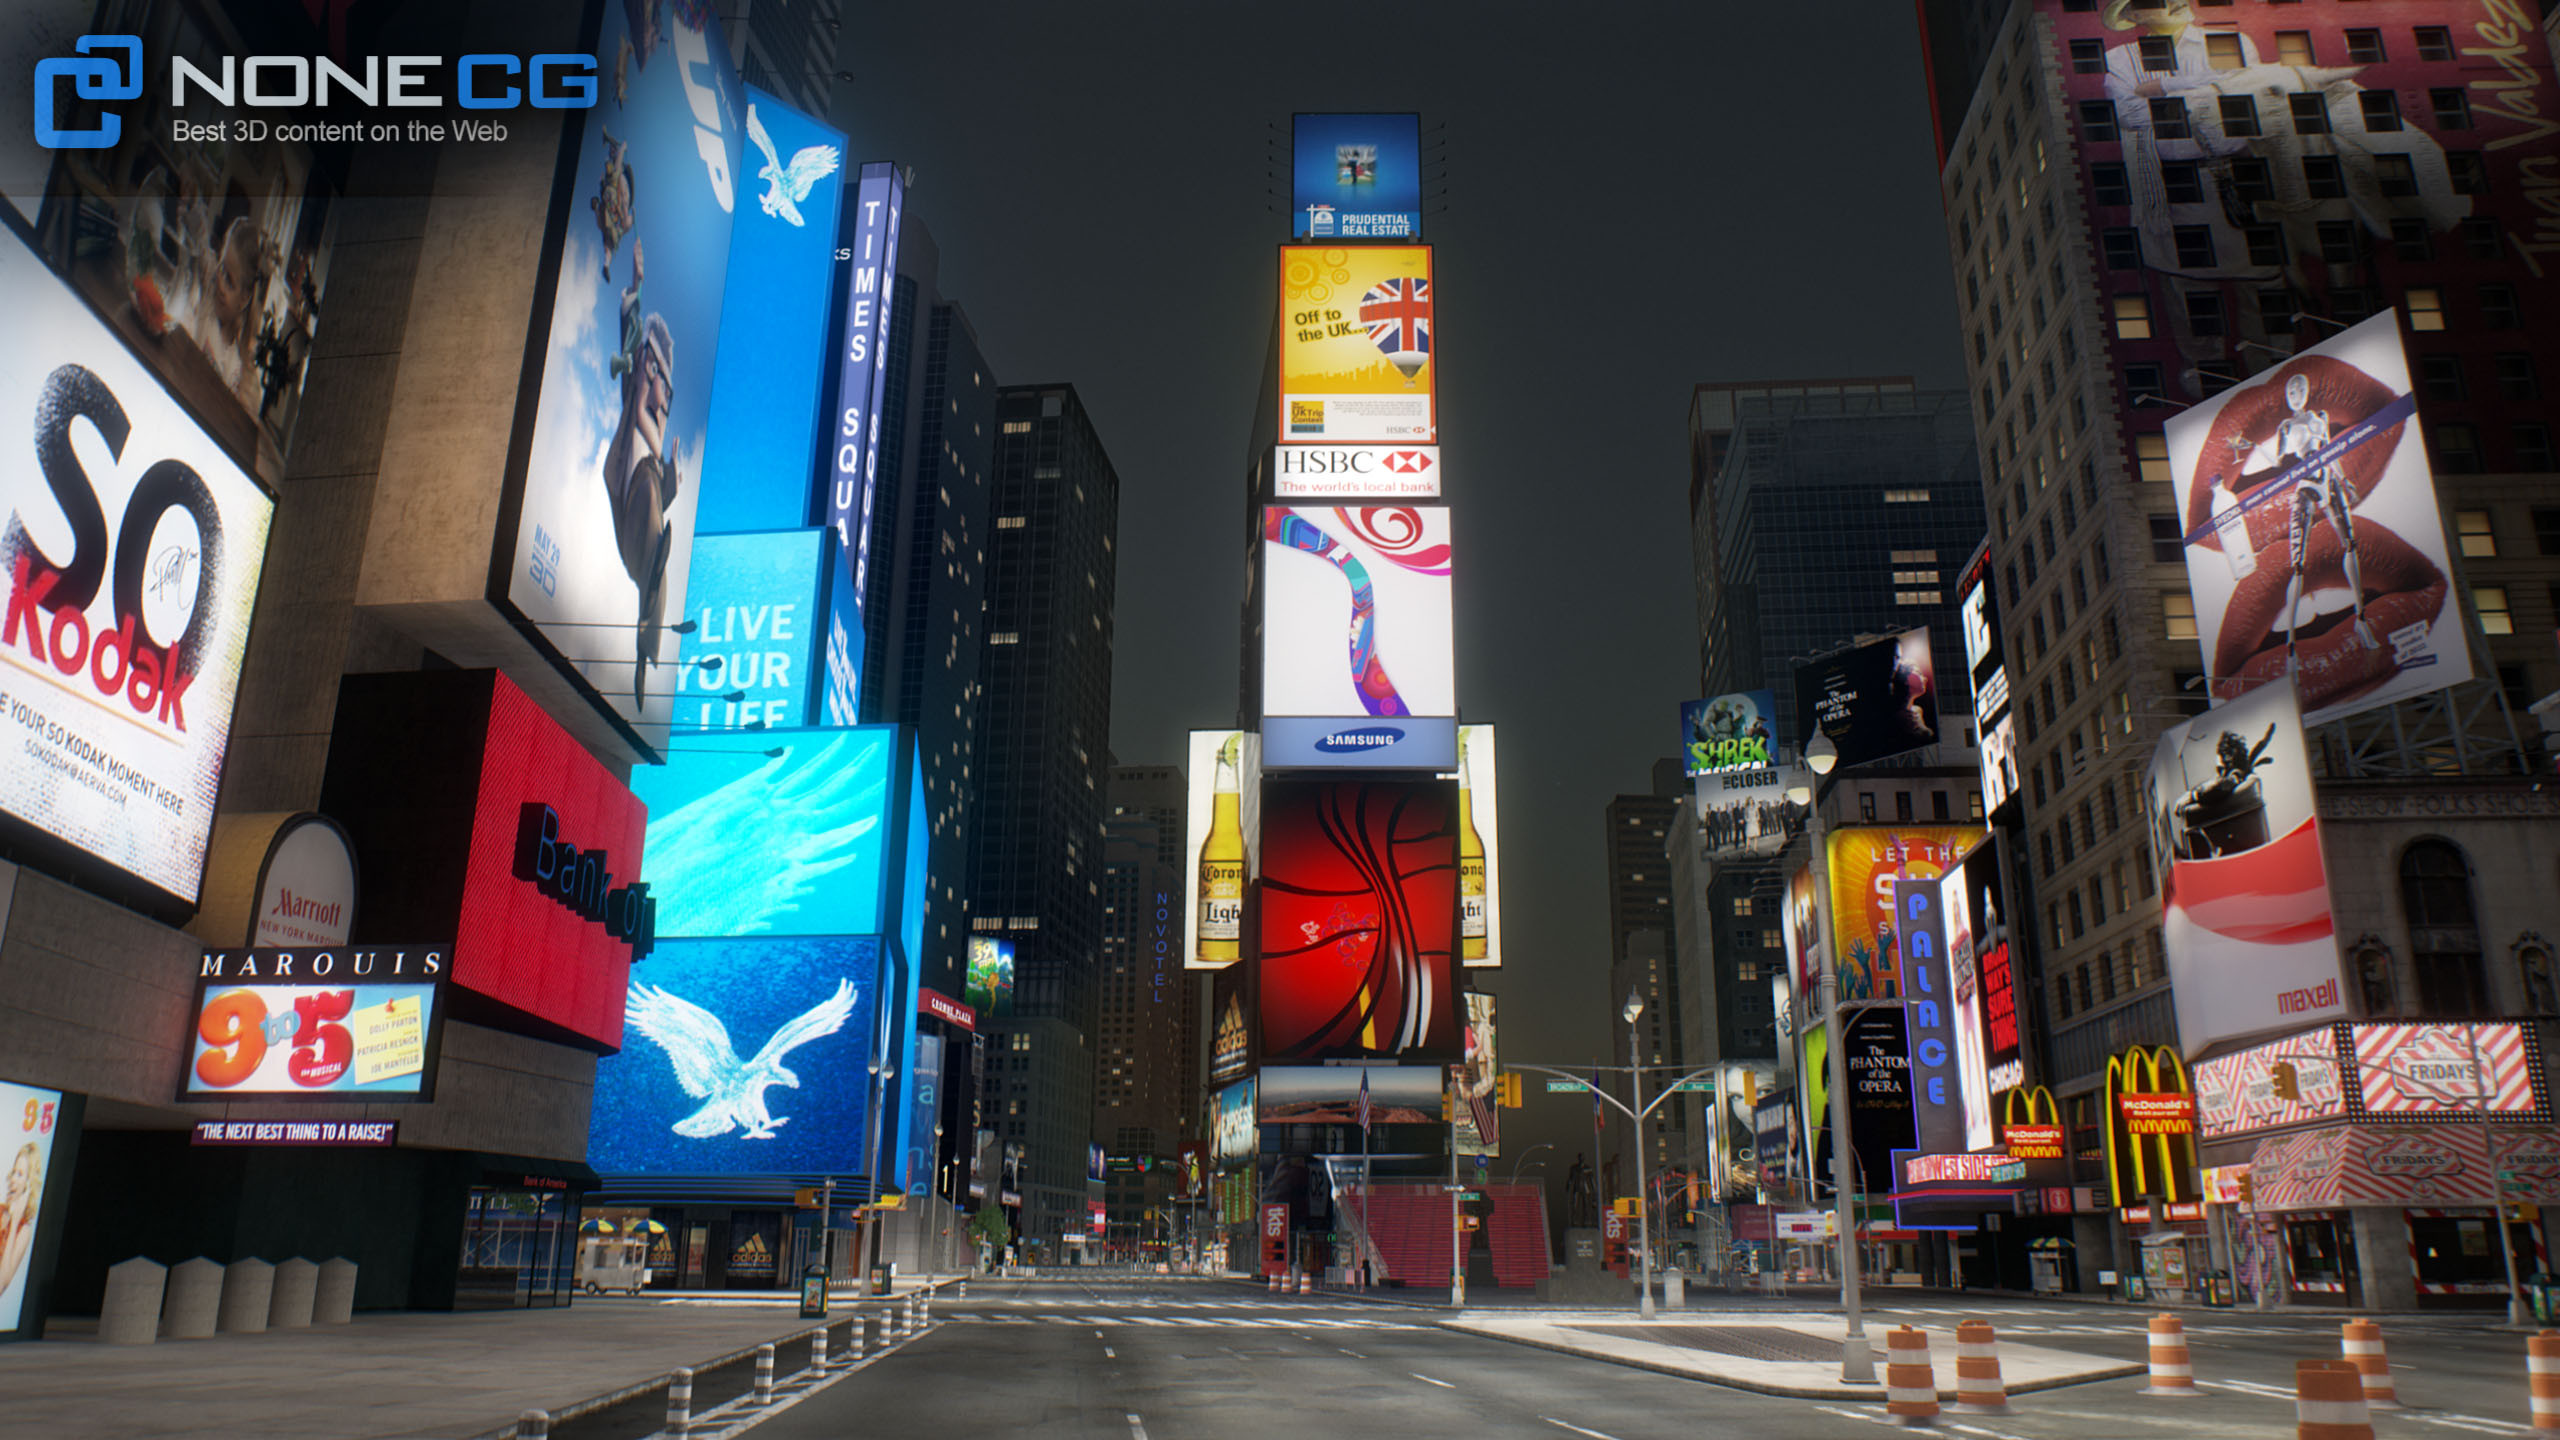 3D NYC Times Square &amp; Broadway